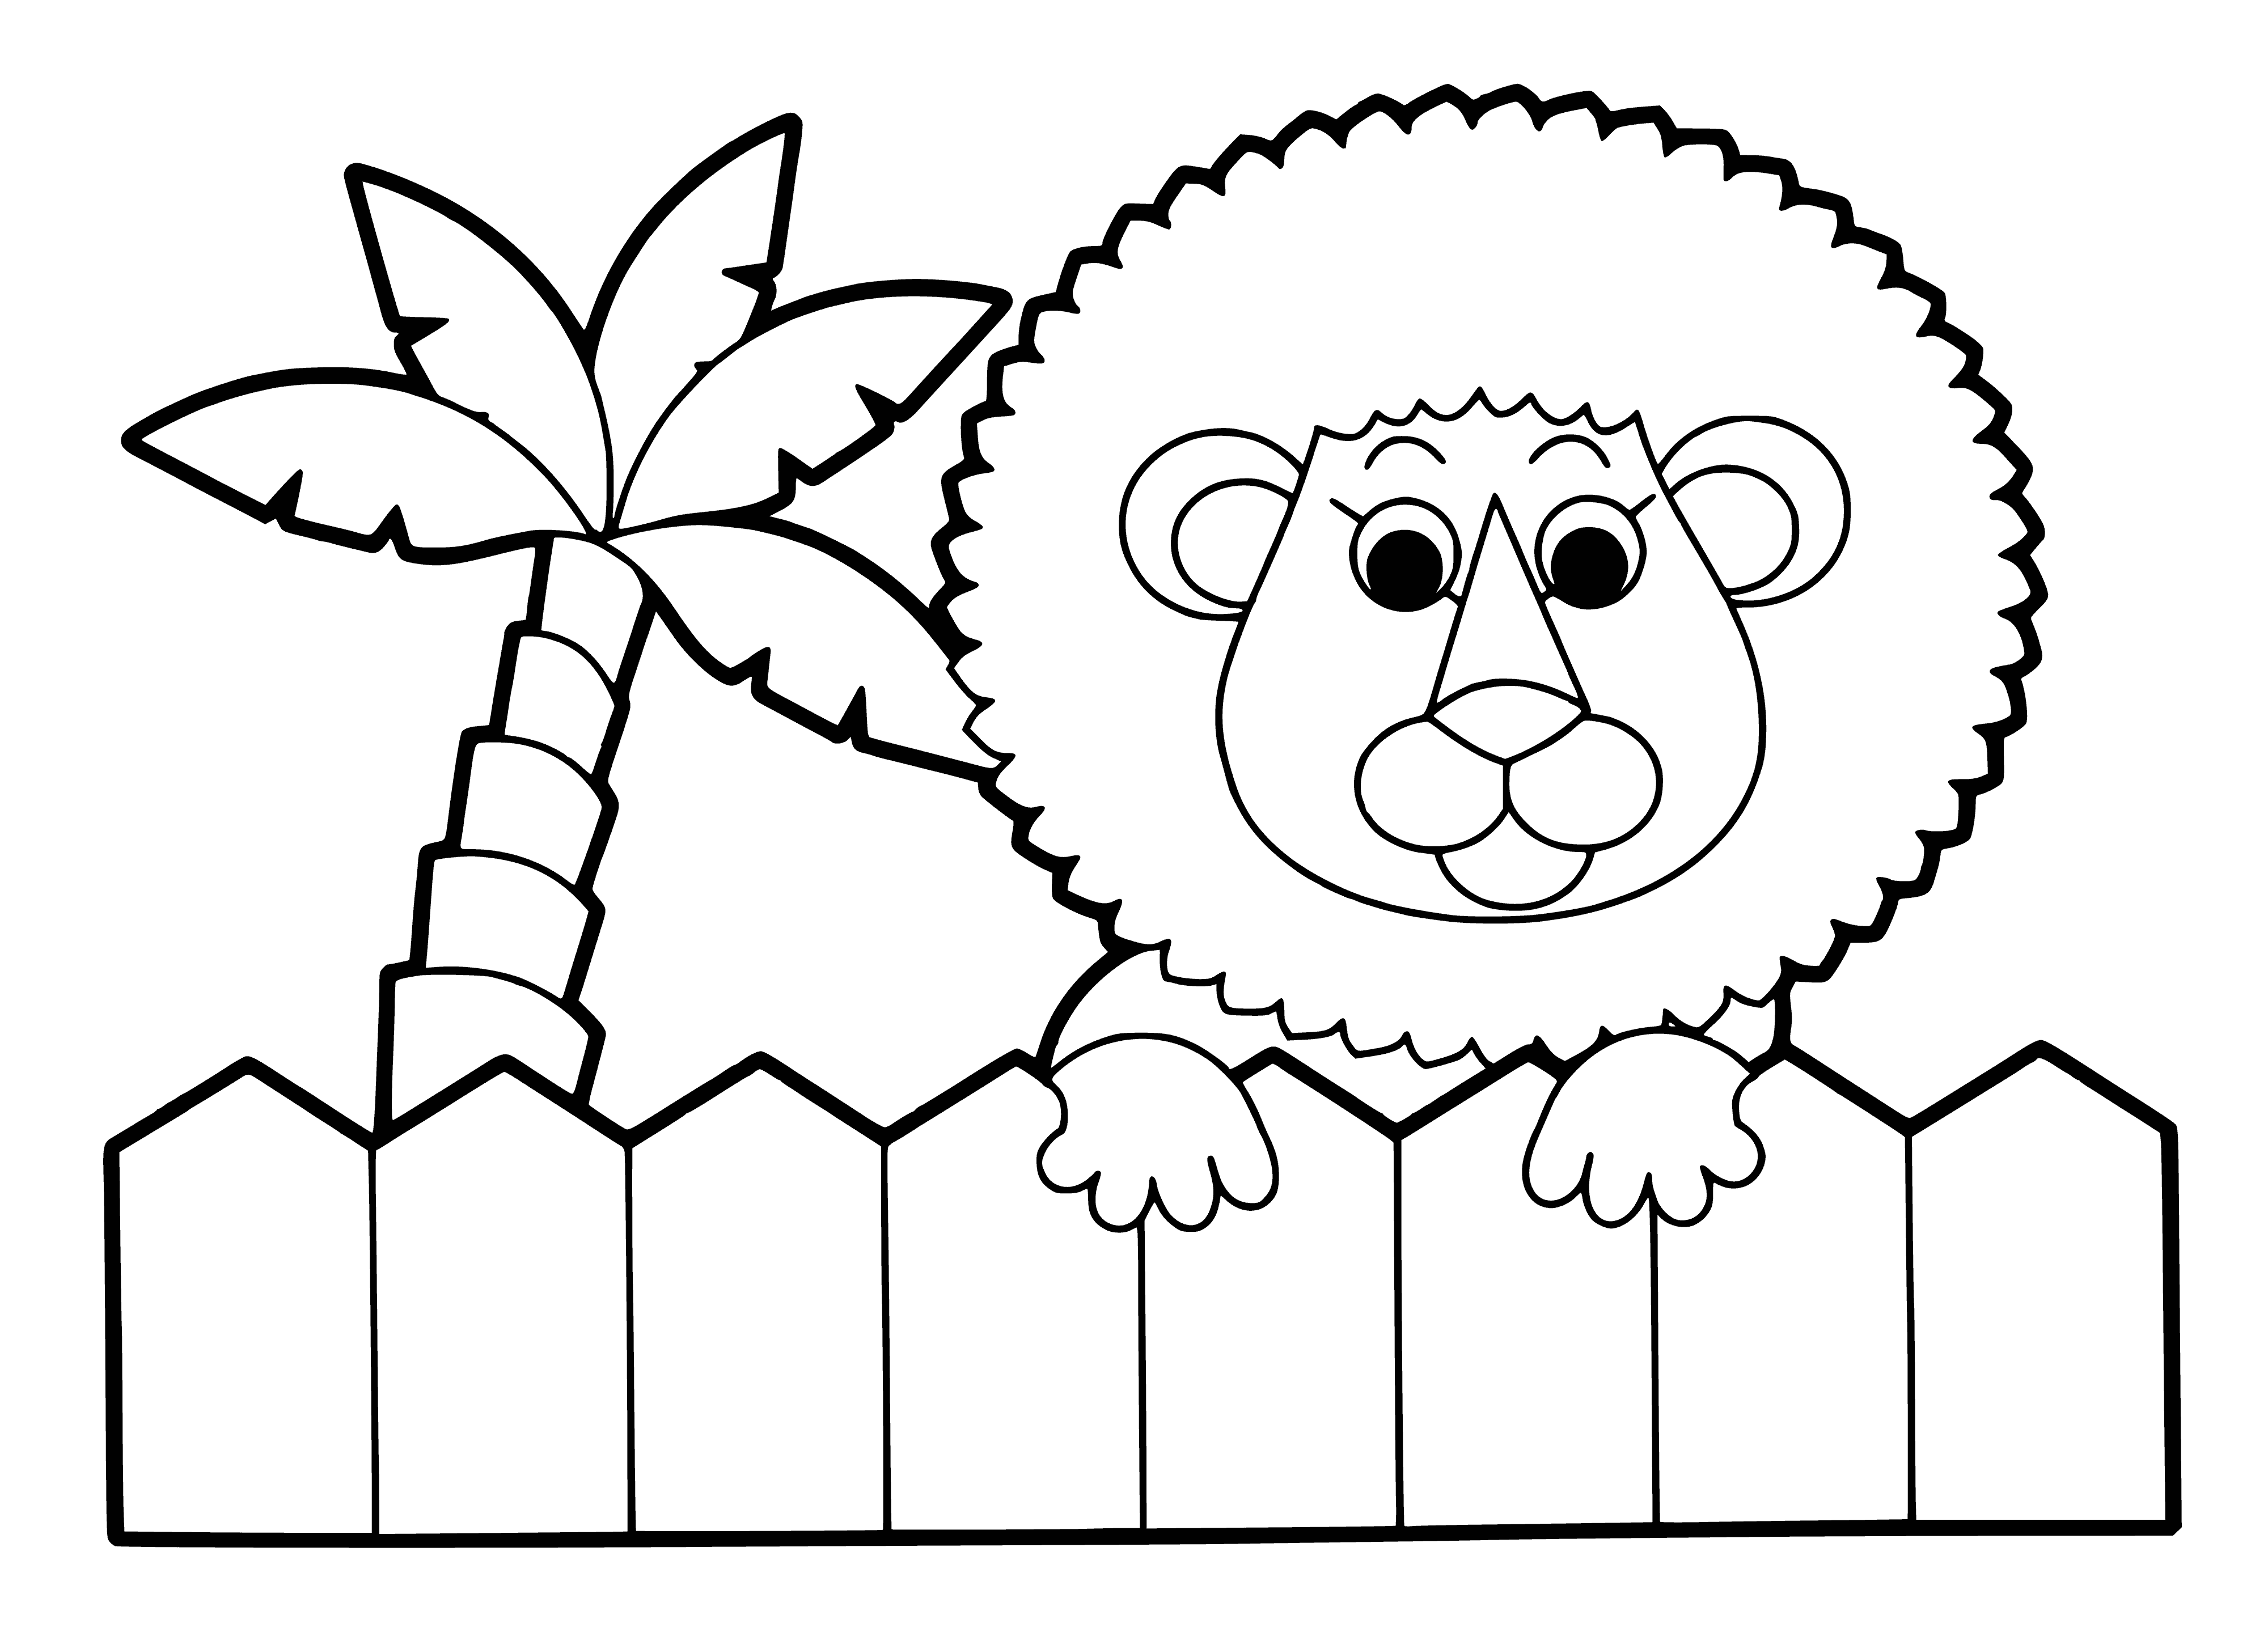 coloring page: Lev is a proud little lion who loves styling his mane by coloring it in for his friends.